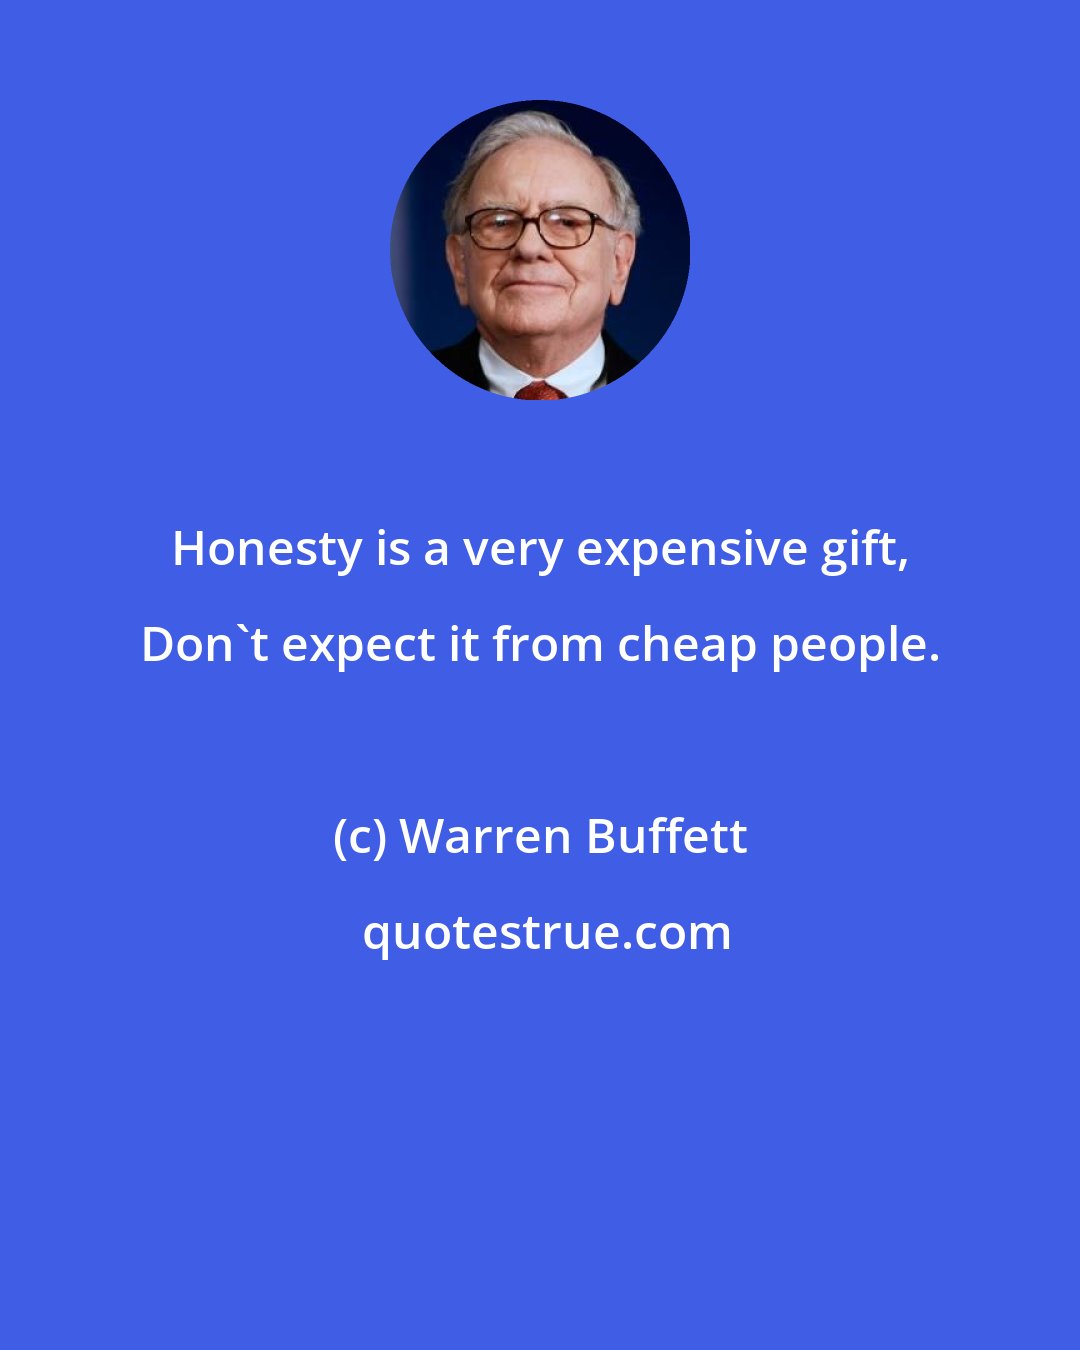 Warren Buffett: Honesty is a very expensive gift, Don't expect it from cheap people.